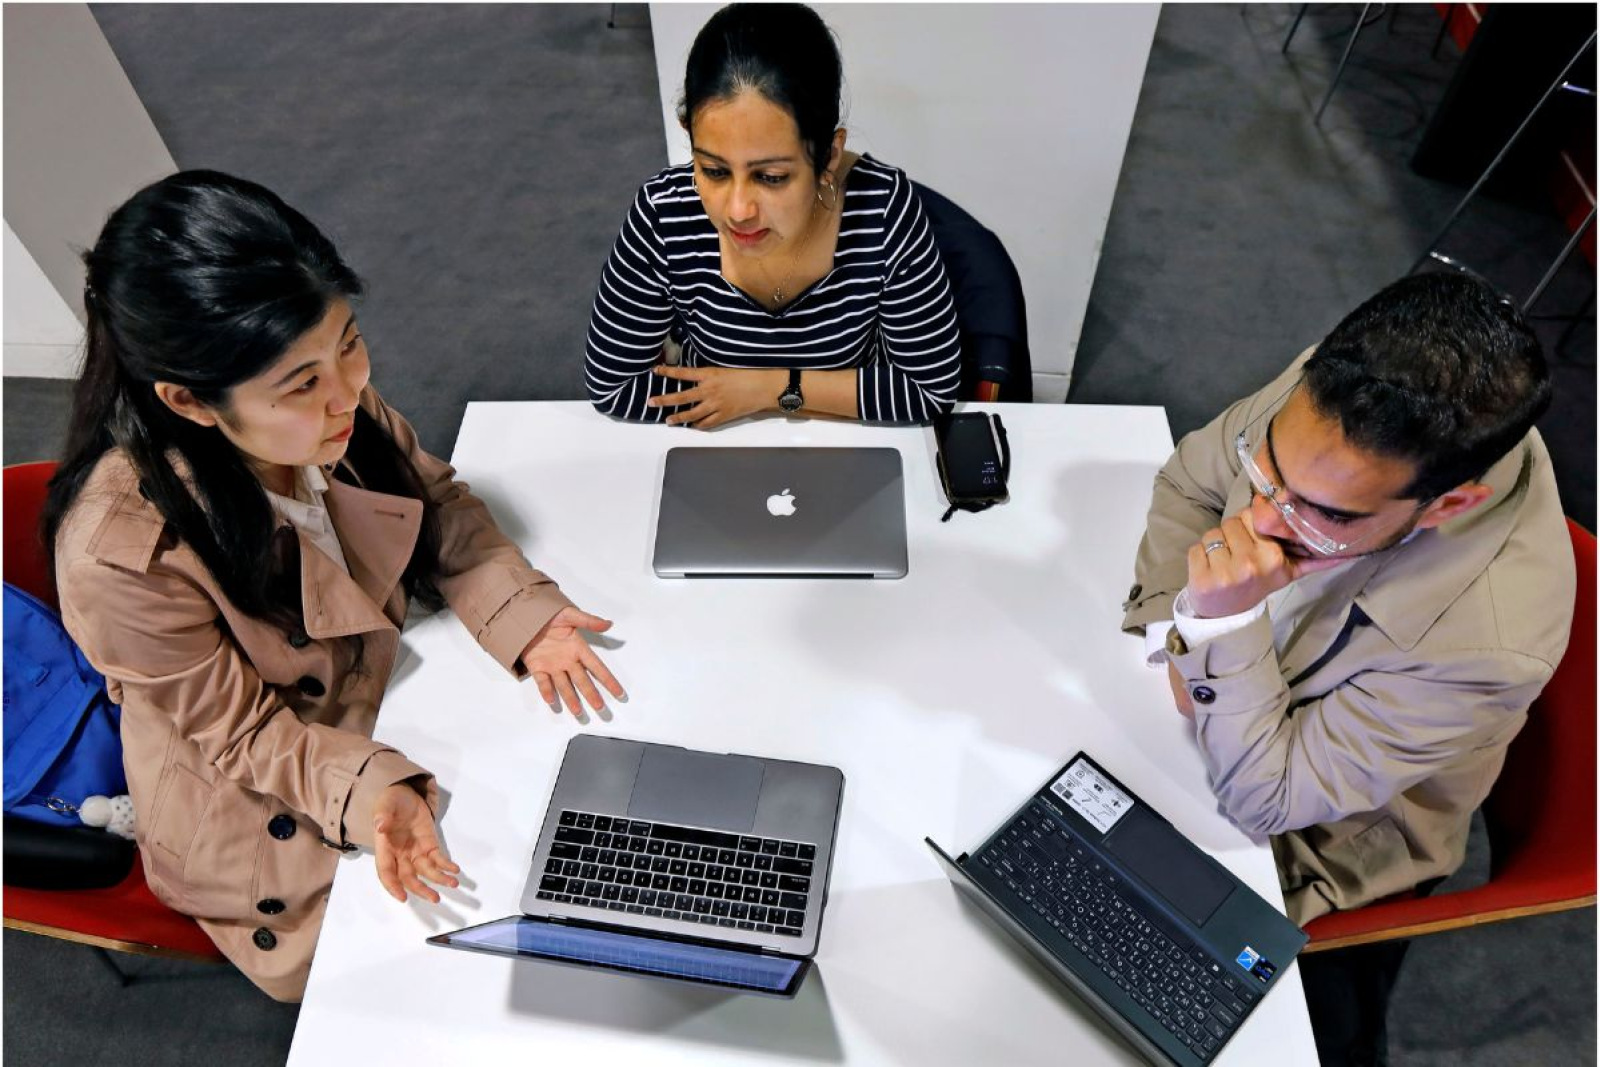 Three students seated at a desk looking at work on a laptop being presented by the student on the left.